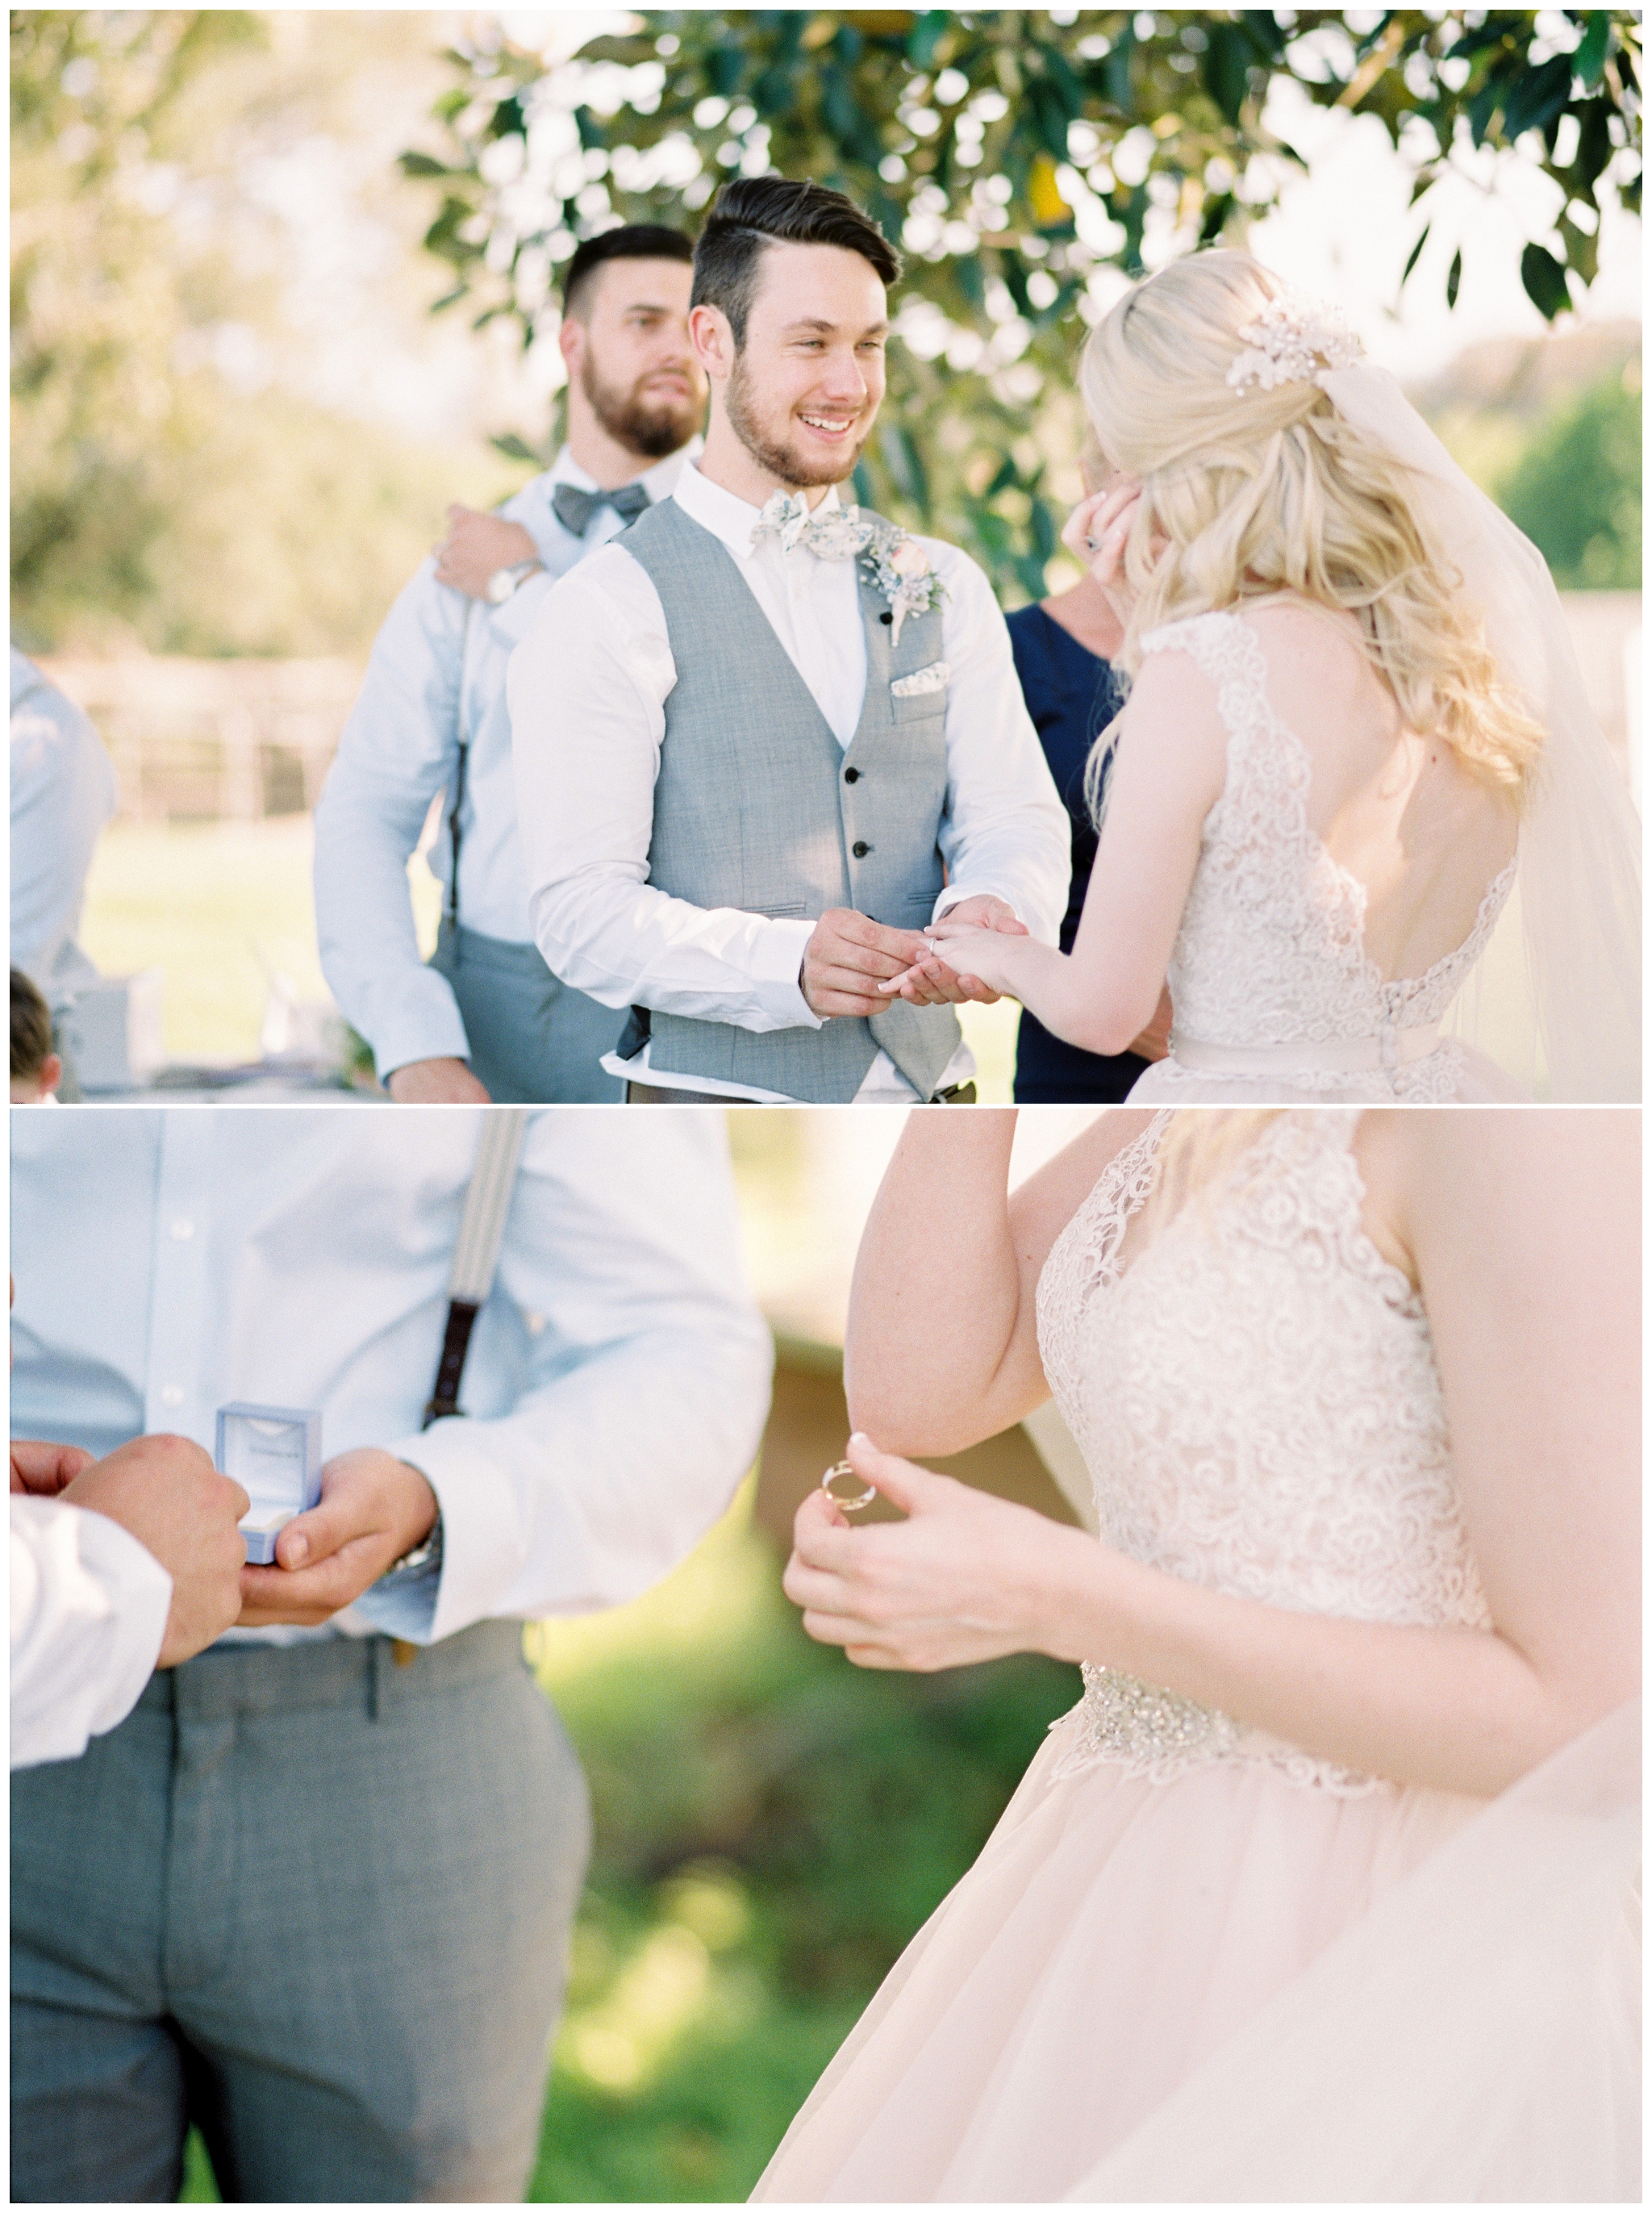 Tegan and Alex Wedding at Albert River Wines by Casey Jane Photography 35